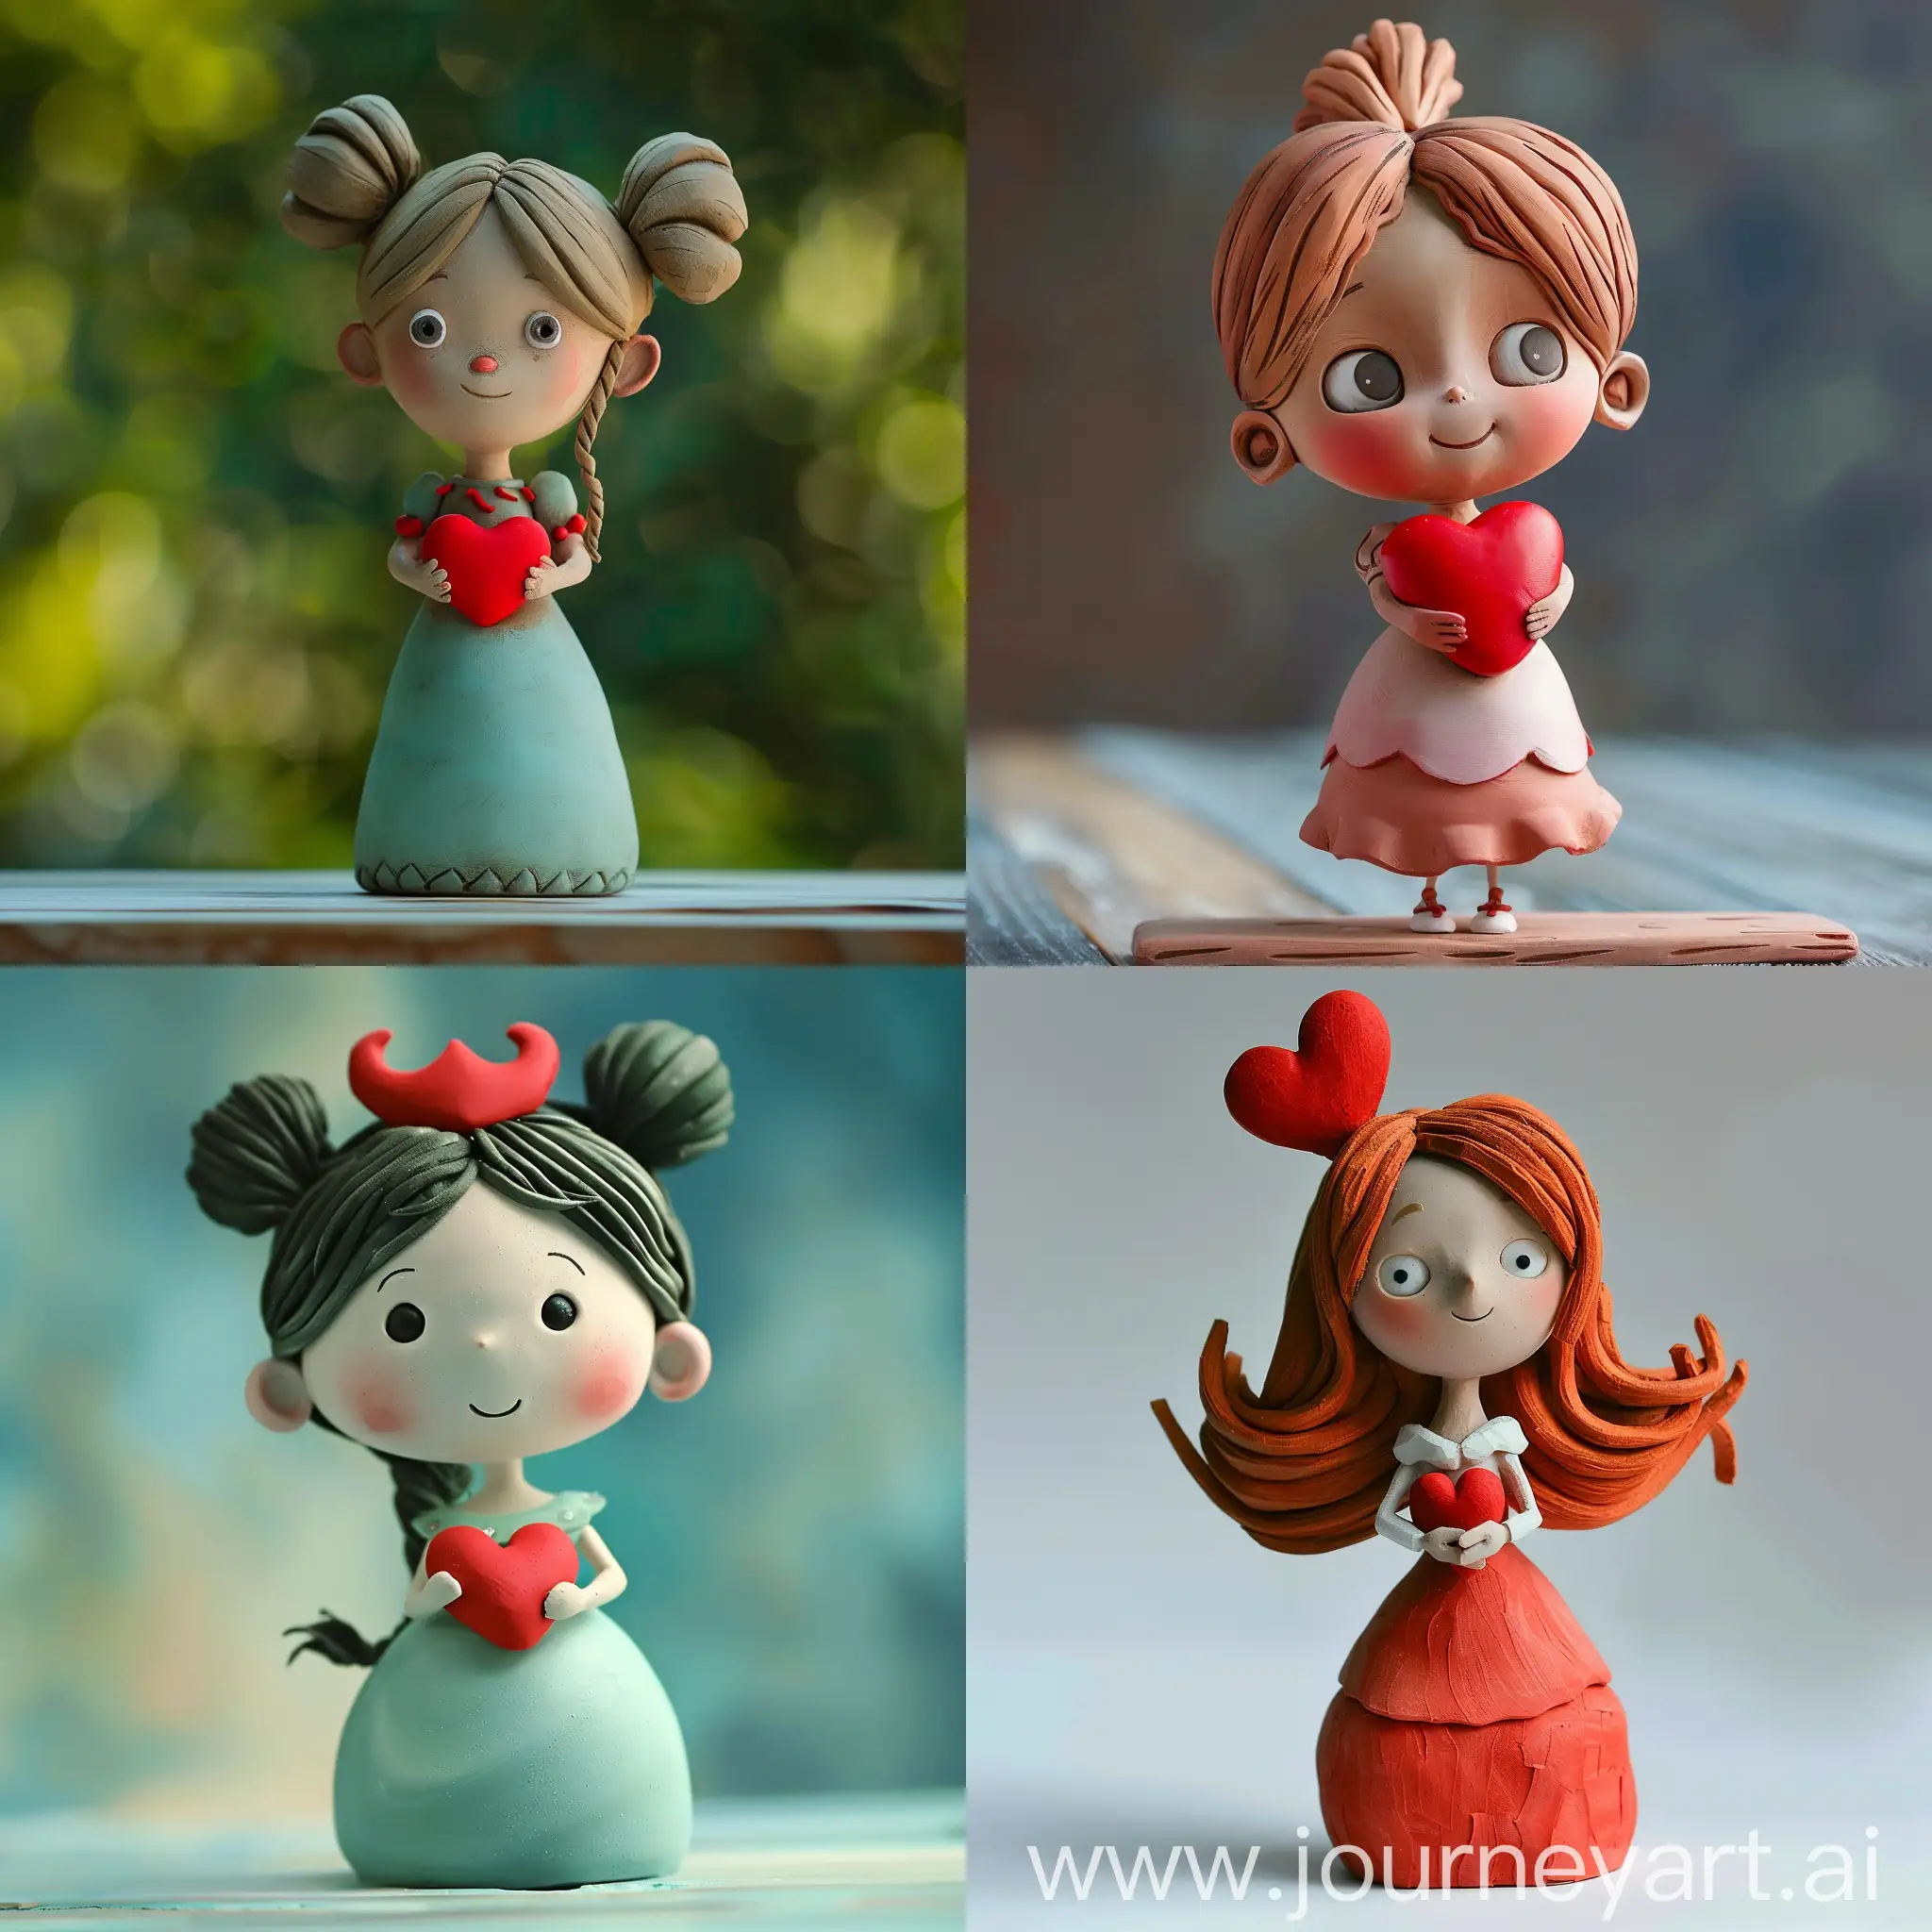 Adorable-Little-Princess-Holding-a-Red-Heart-in-Claymation